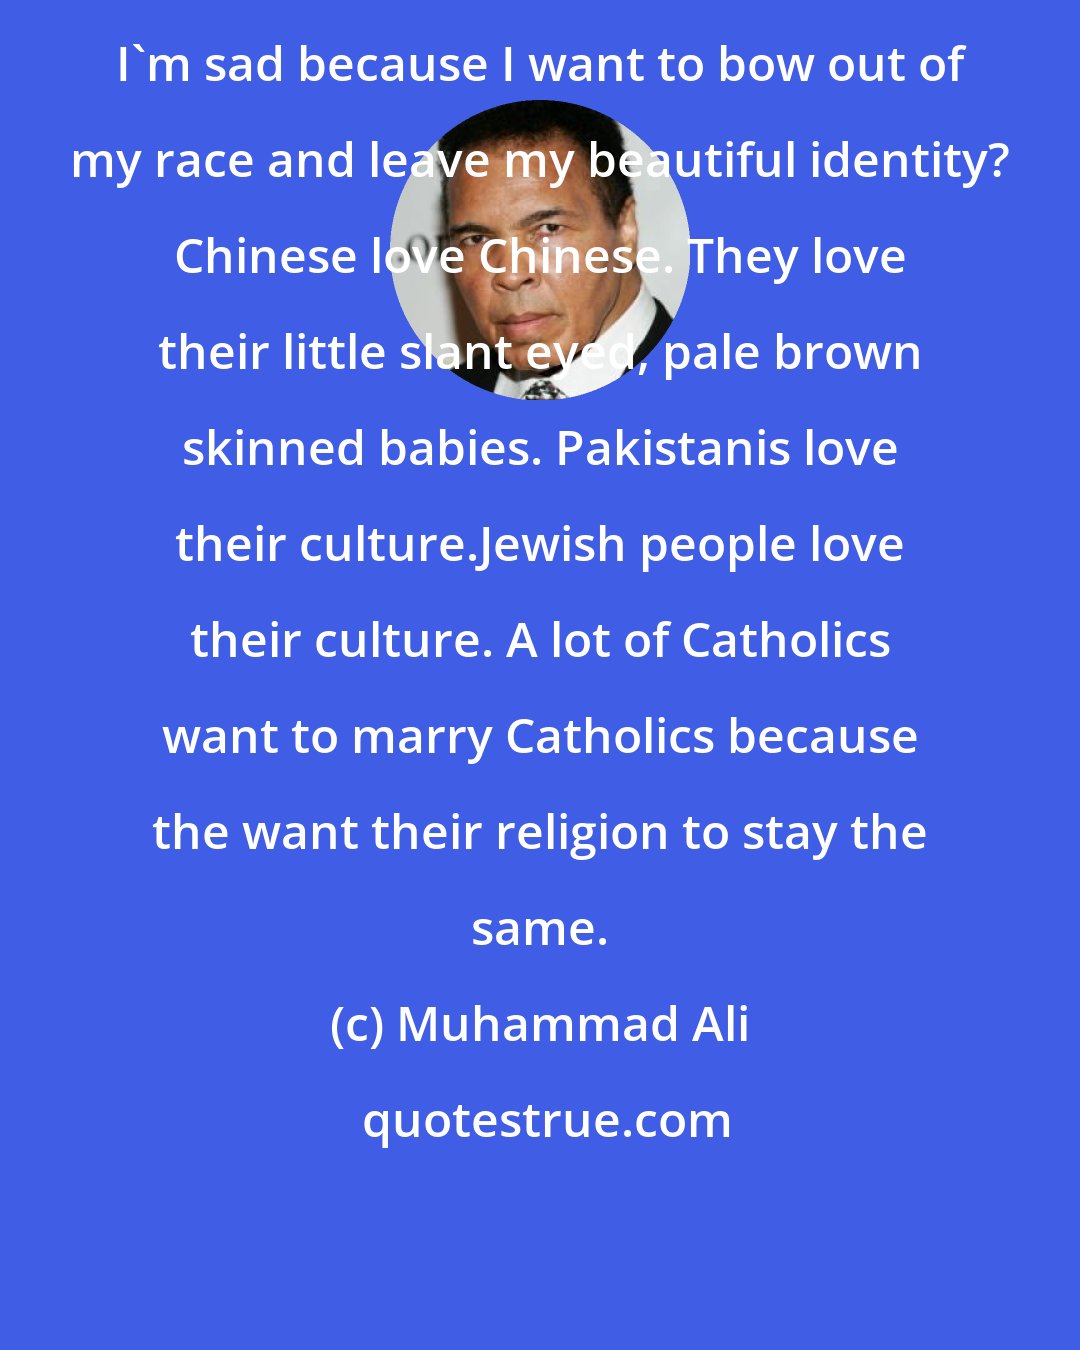 Muhammad Ali: I'm sad because I want to bow out of my race and leave my beautiful identity? Chinese love Chinese. They love their little slant eyed, pale brown skinned babies. Pakistanis love their culture.Jewish people love their culture. A lot of Catholics want to marry Catholics because the want their religion to stay the same.